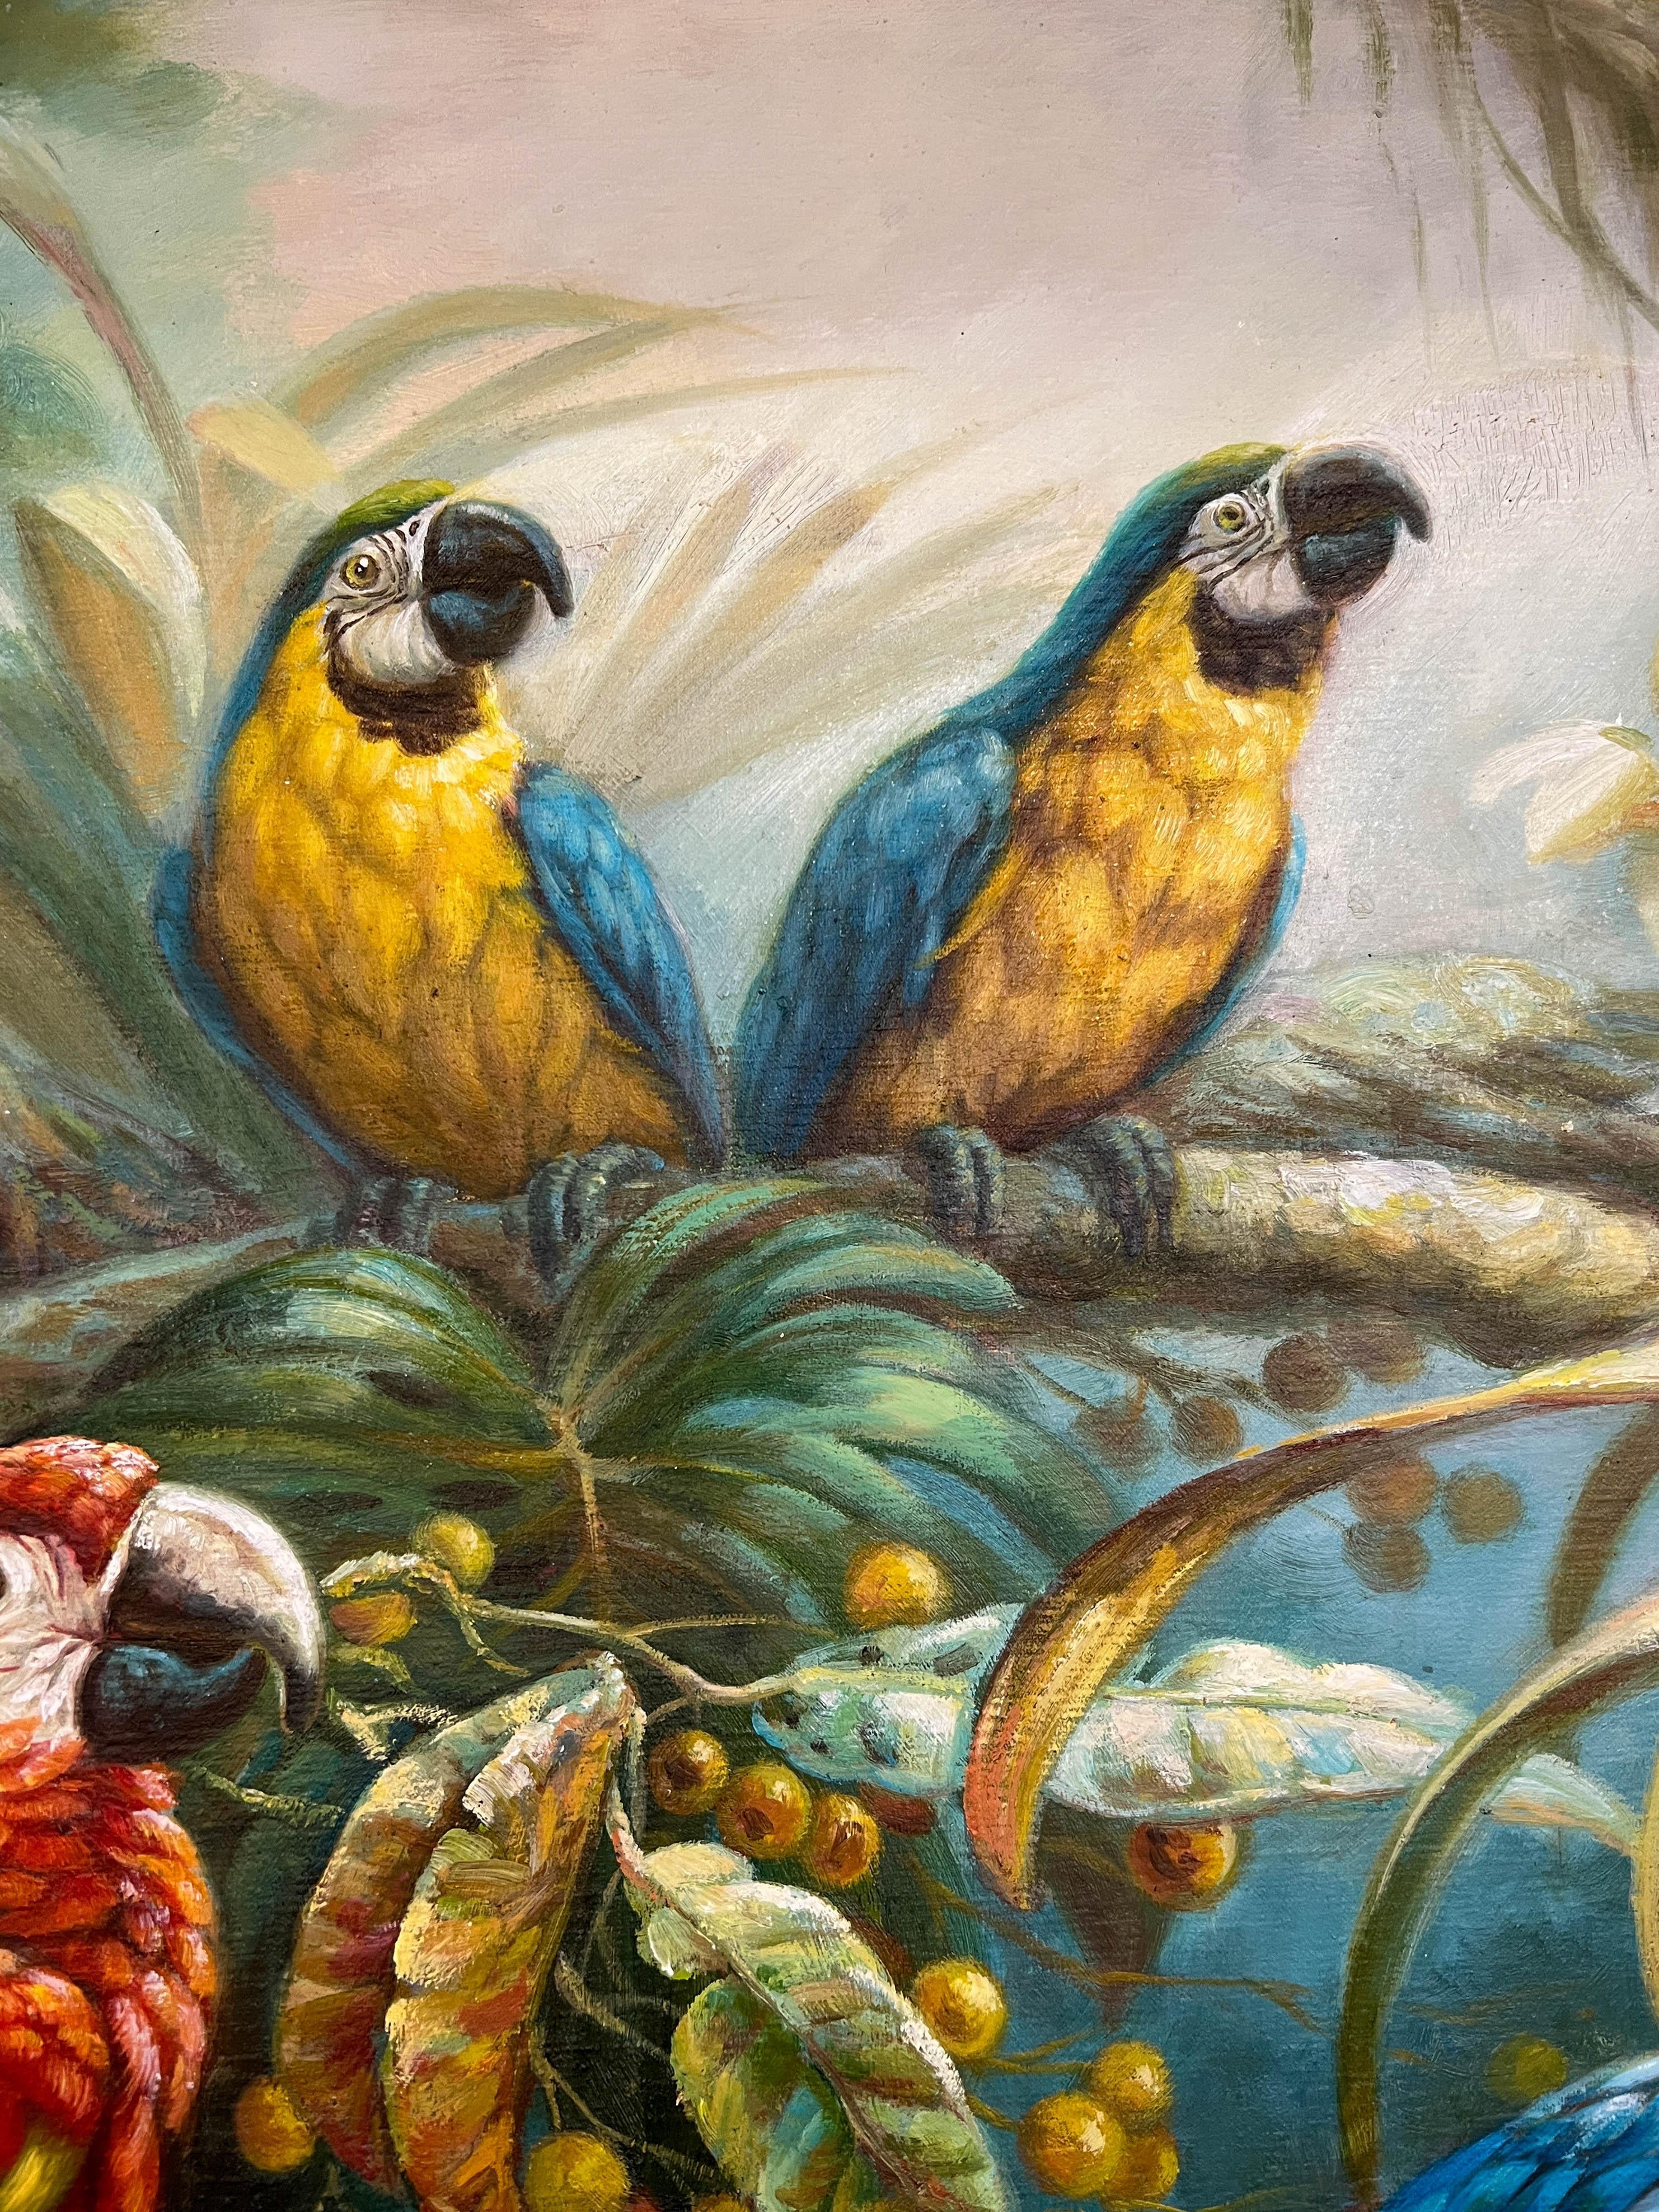 Exotic Oil Painting of Four Brilliant Macaws In Good Condition For Sale In Palm Beach Gardens, FL